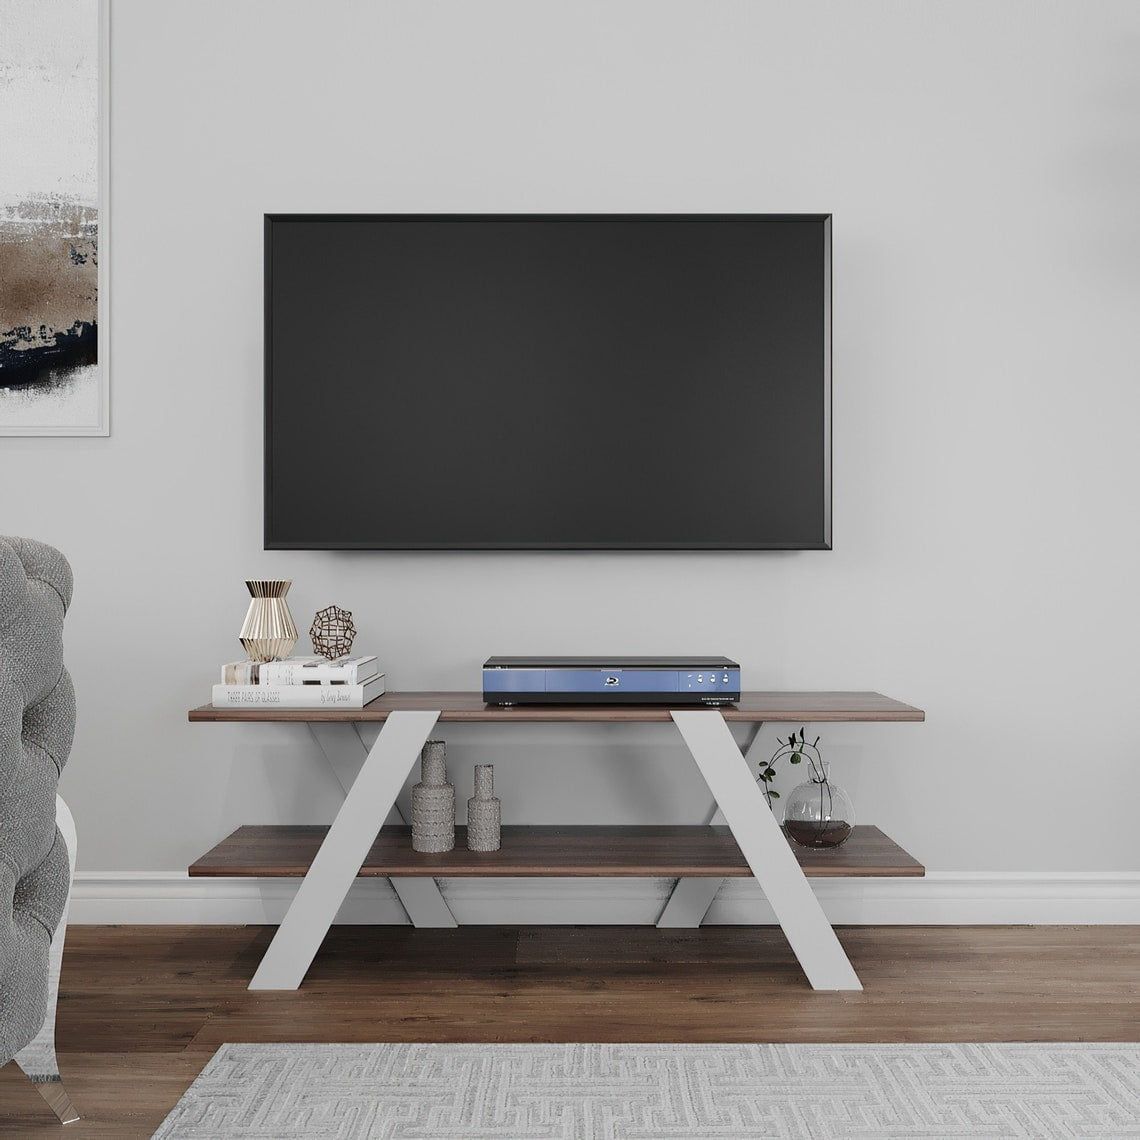 Modern 2 Tier Wood Tv Stand For Tvs Up To 55 Inch – Walmart With Regard To Tier Stands For Tvs (Gallery 9 of 20)